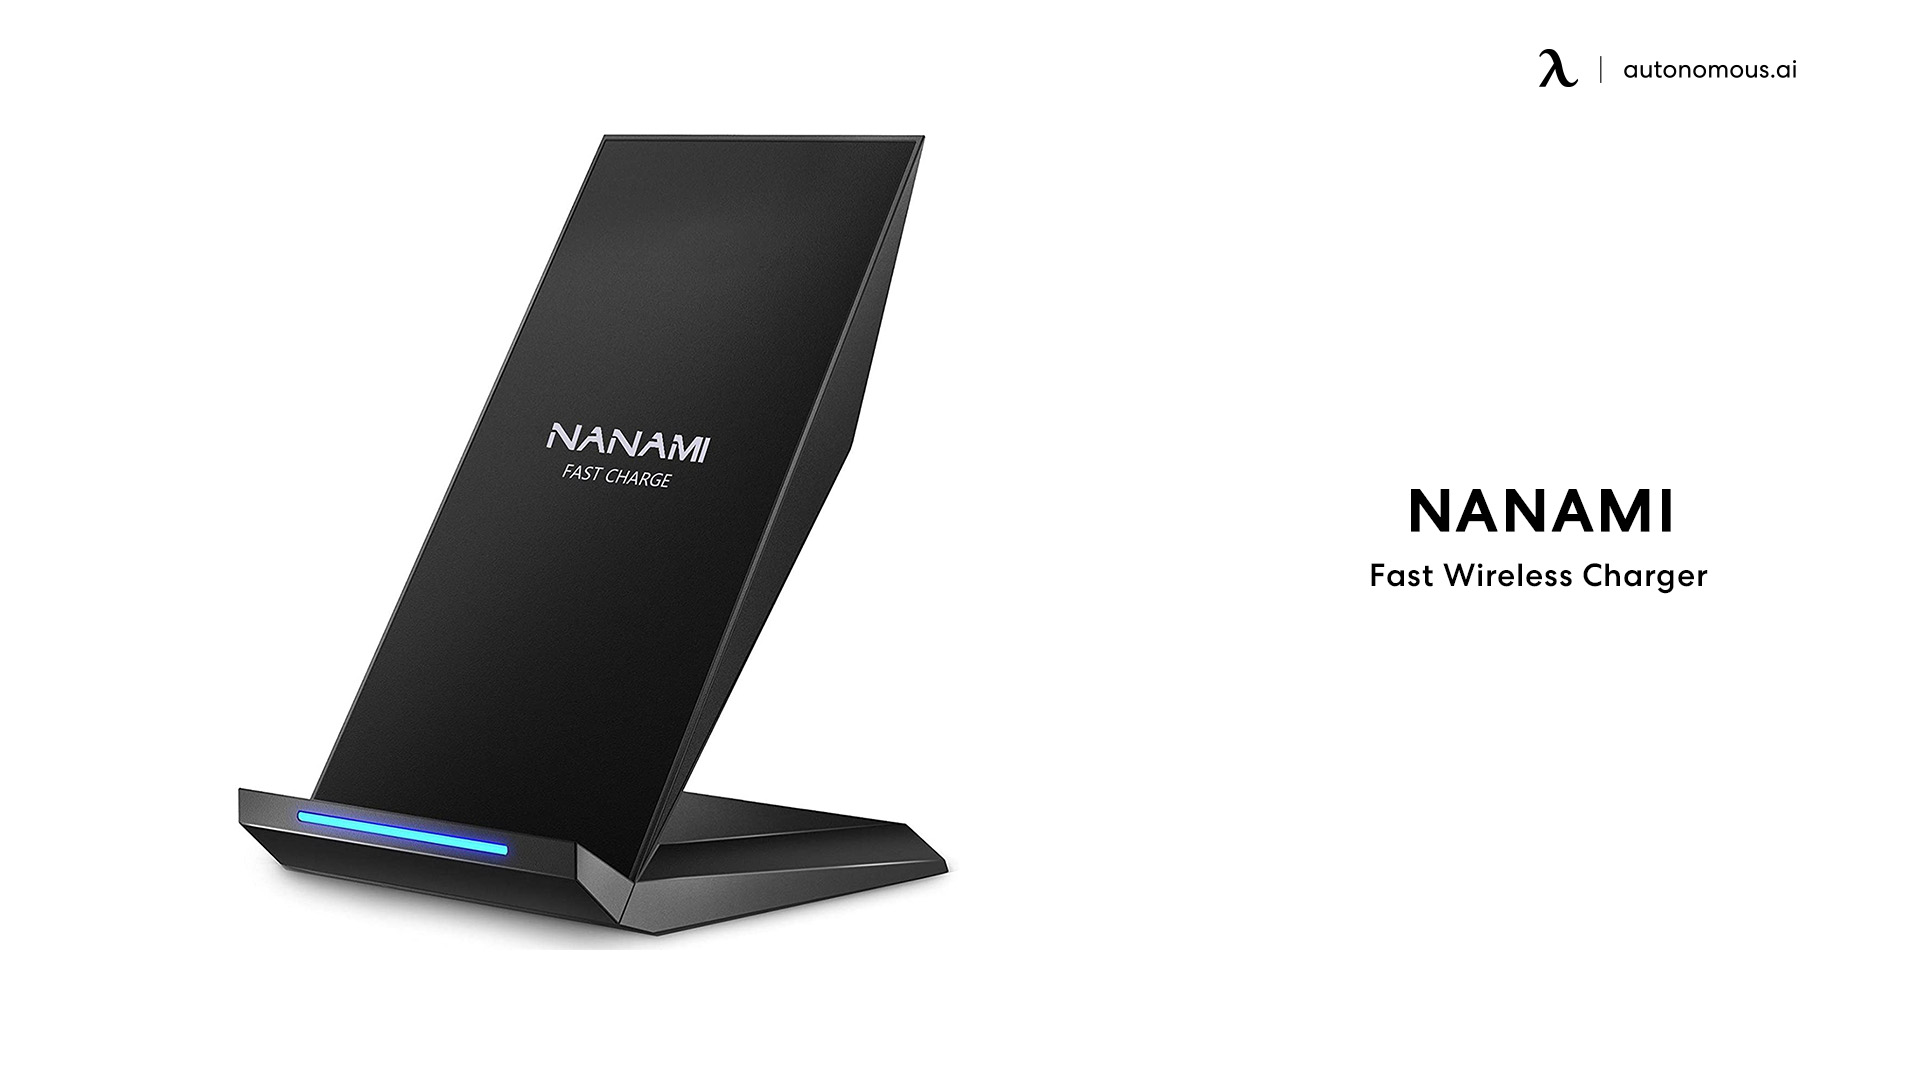 A800 black NANAMI Upgraded Fast Wireless Charger